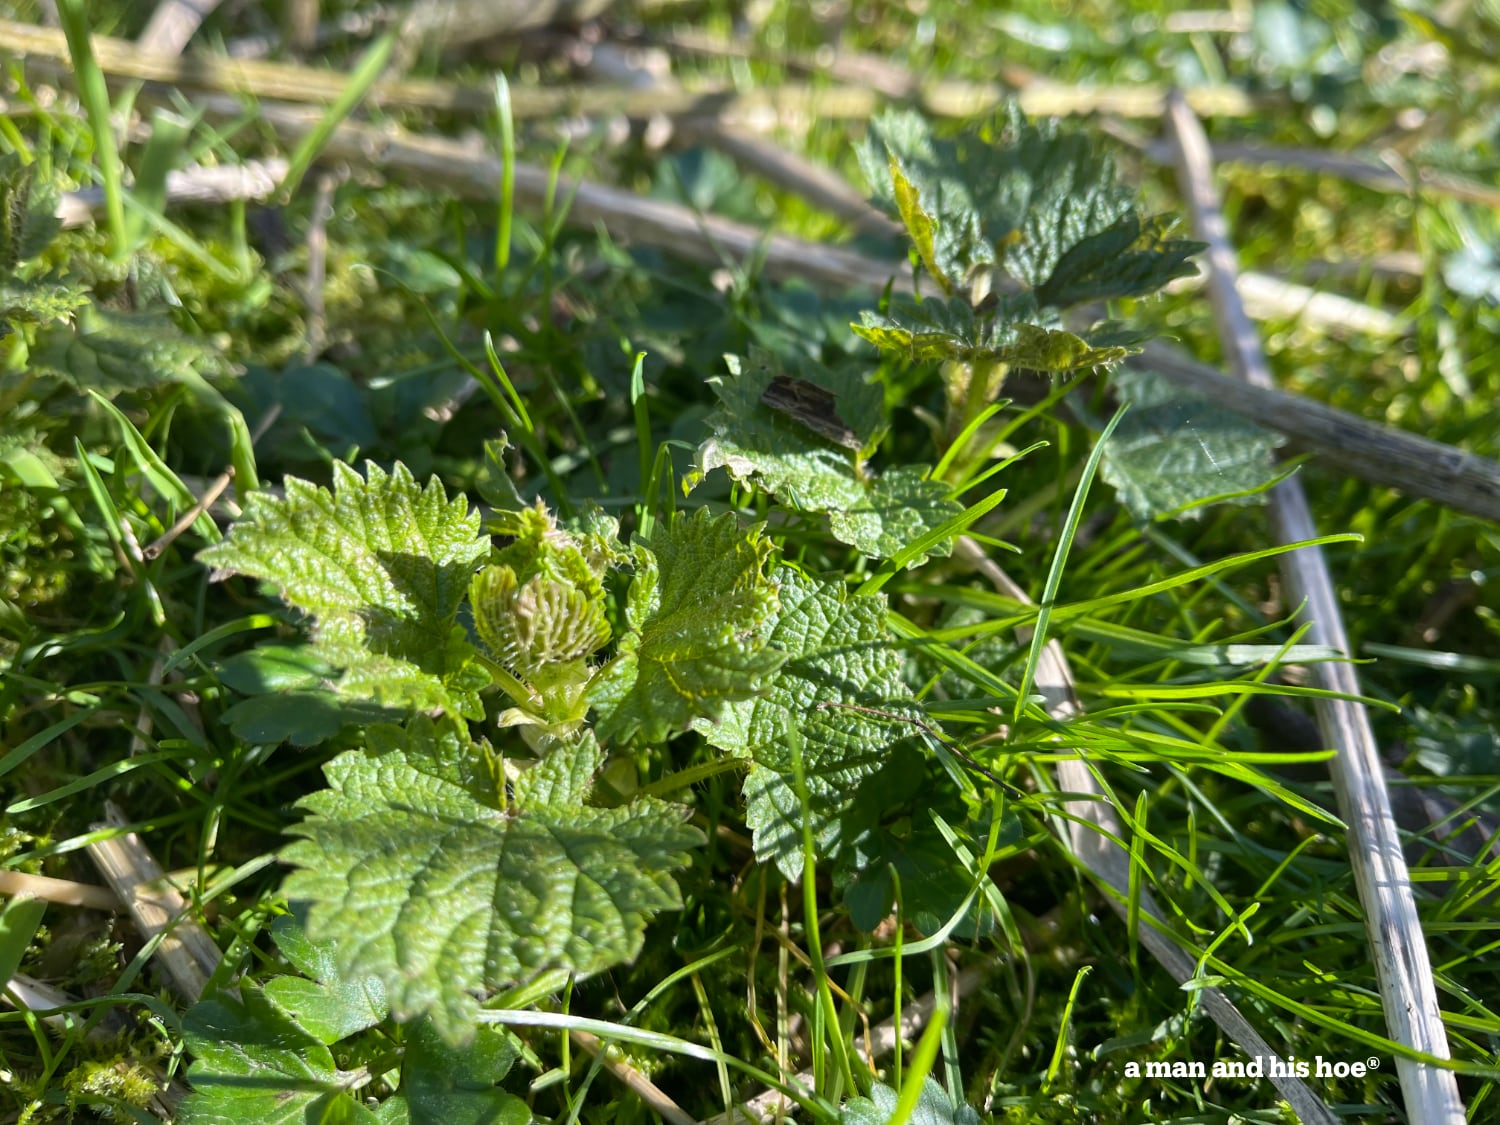 All is not lost - stinging nettles are up.